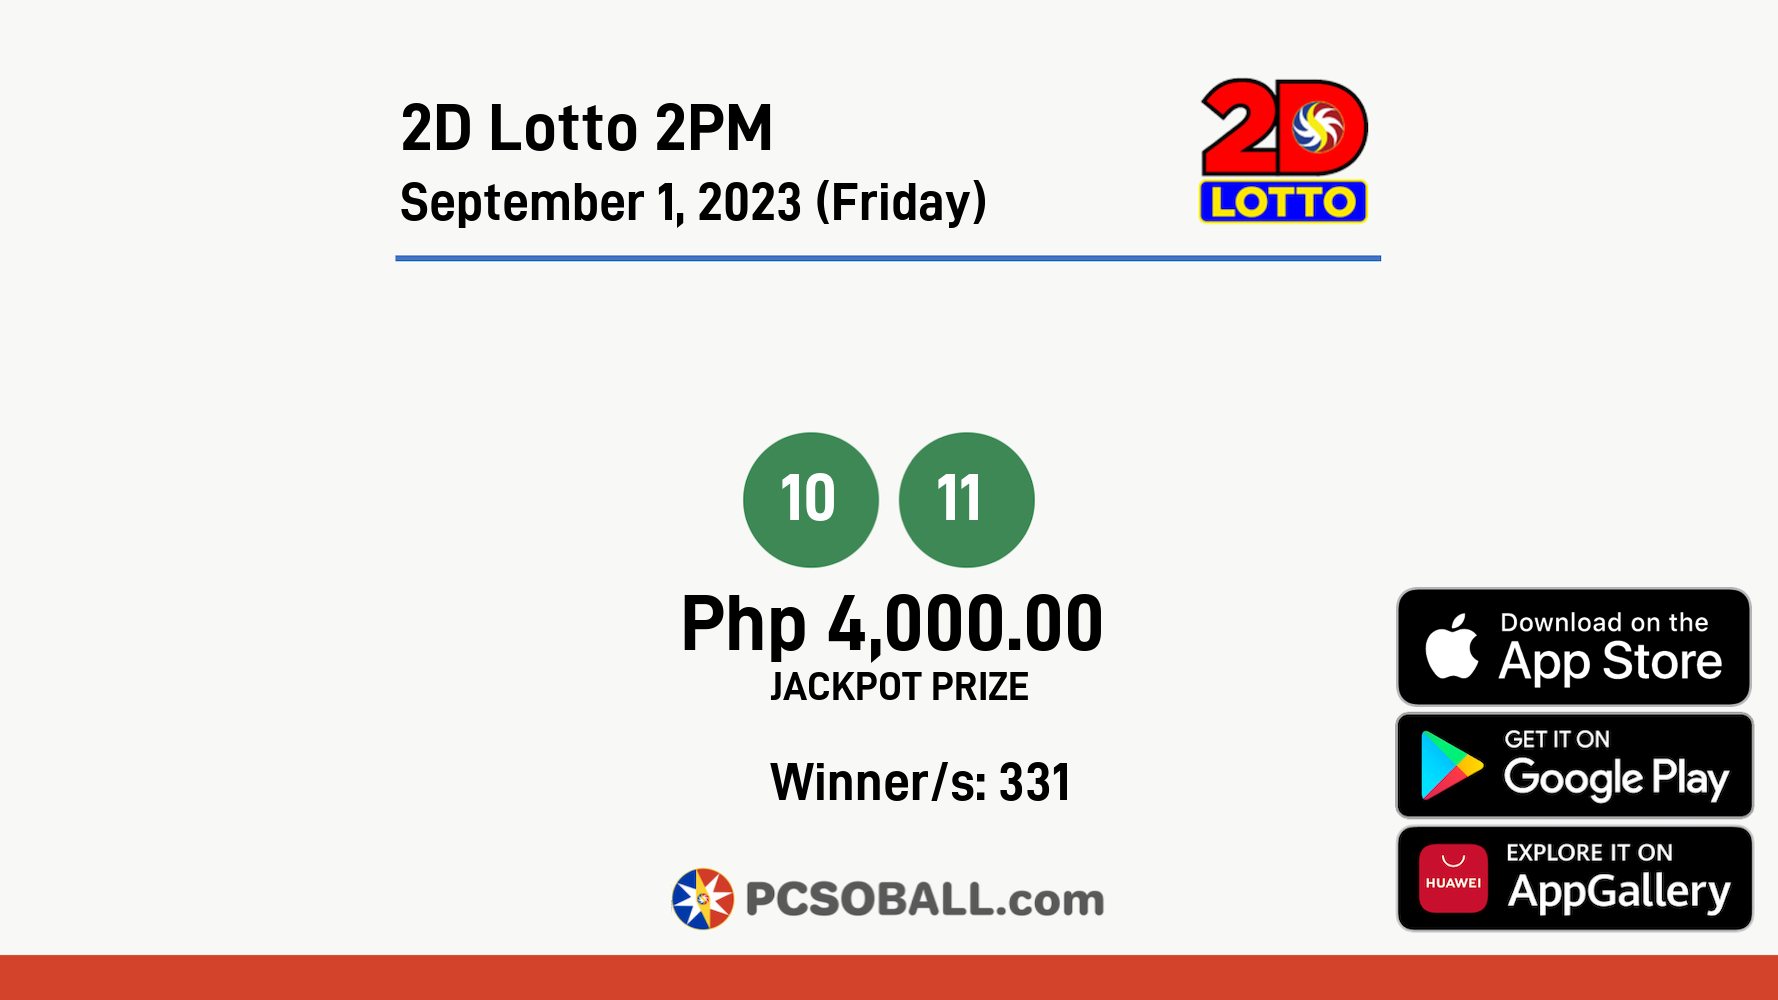 2D Lotto 2PM September 1, 2023 (Friday) Result